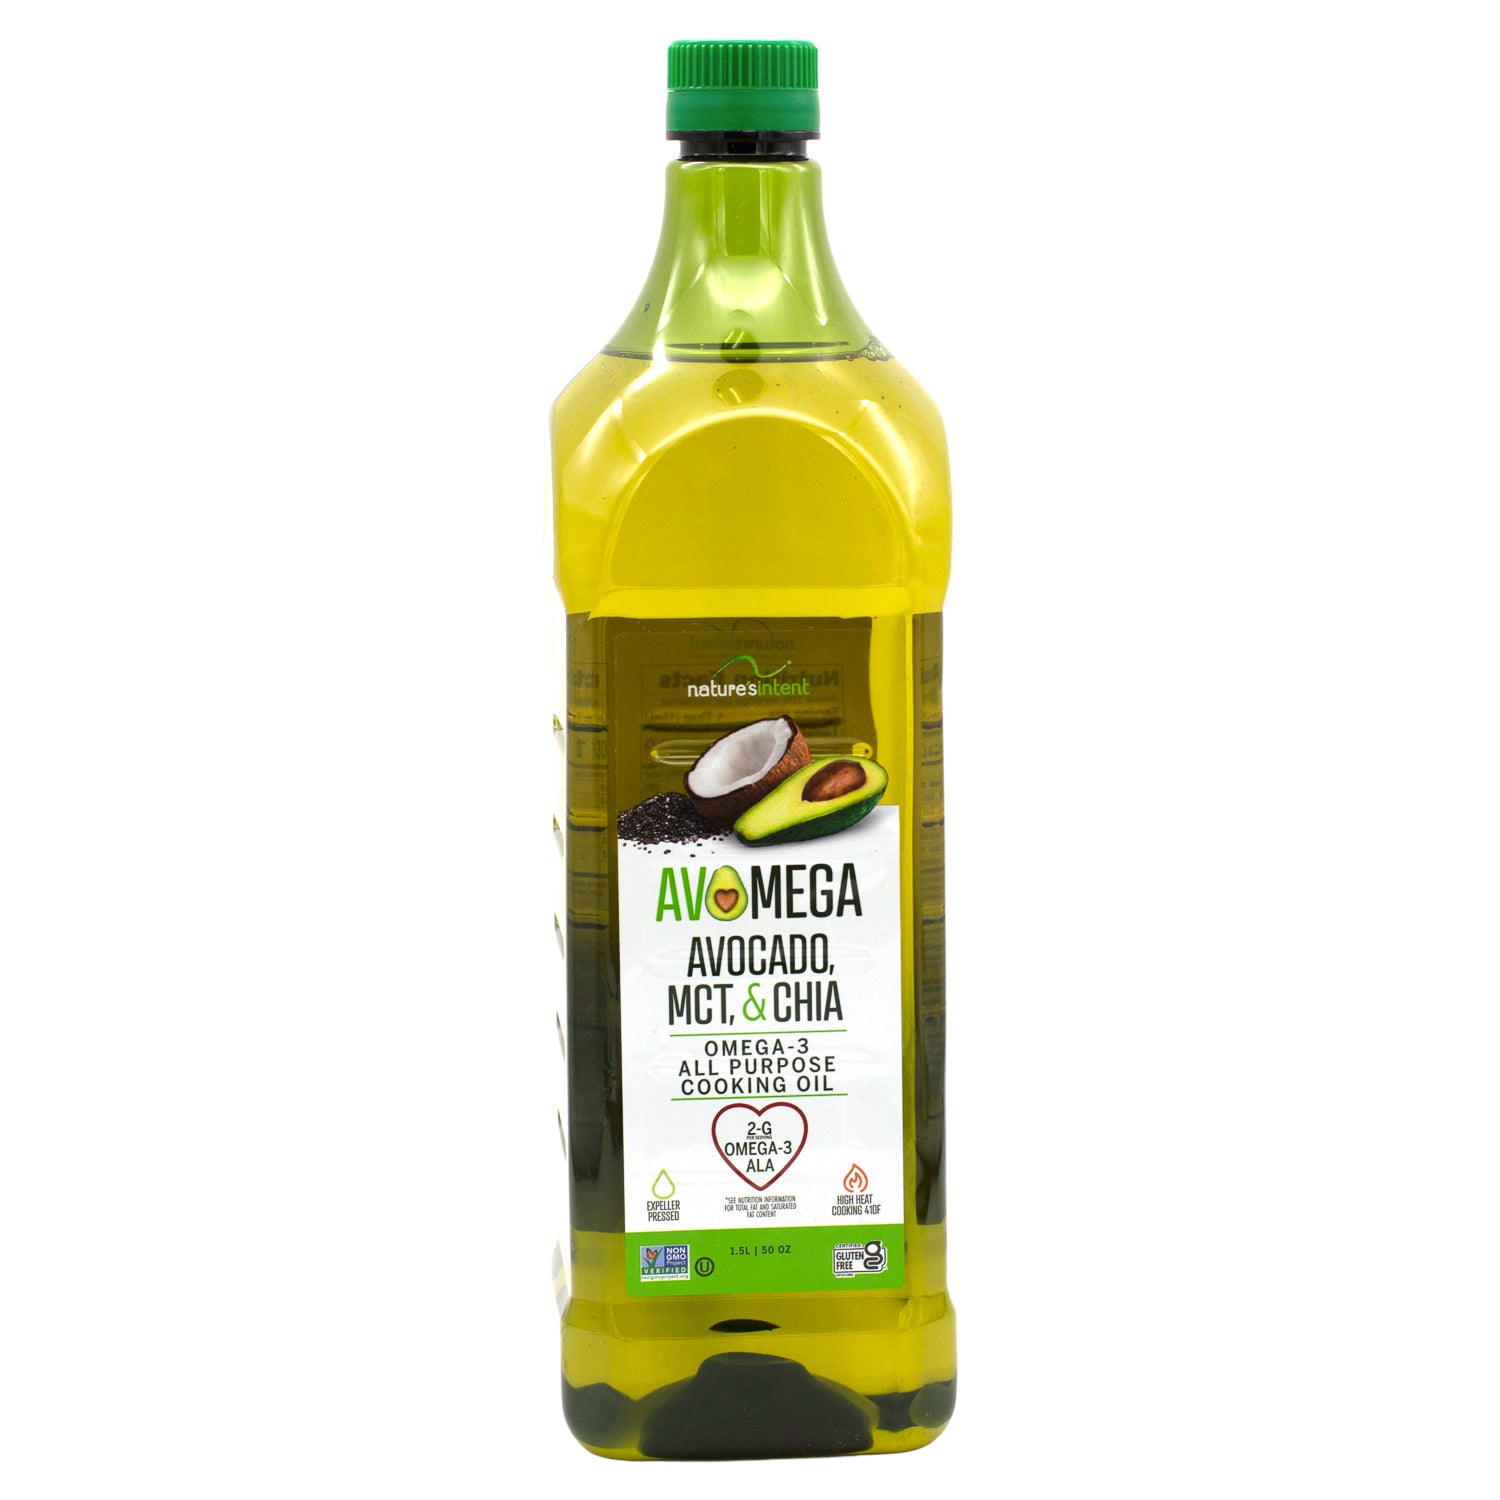 Nature's Intent Avocado, MCT, & Chia All Purpose Cooking Oil Nature's Intent Original 50 Ounce 